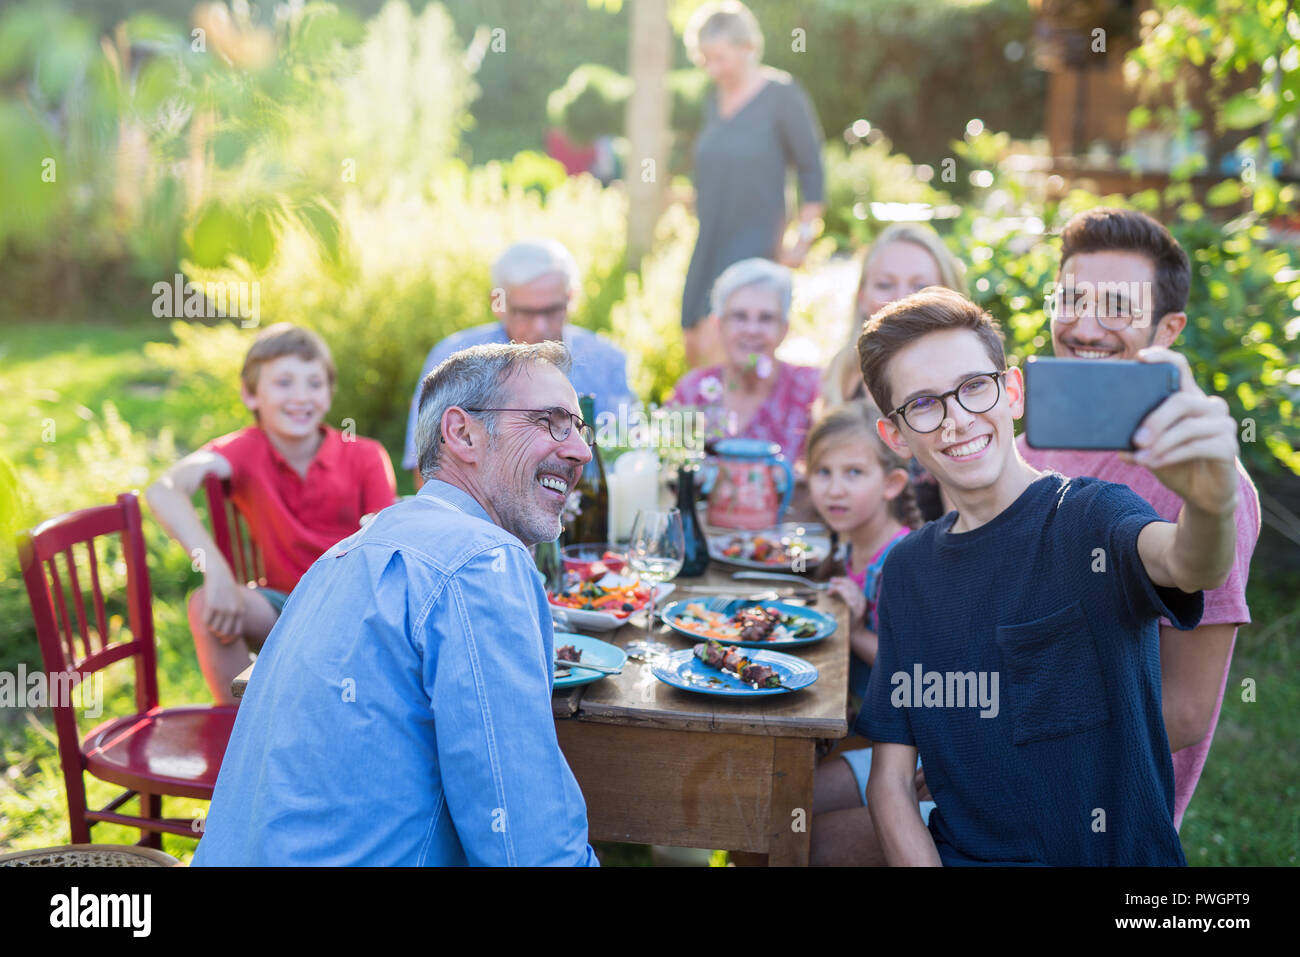 during a bbq a boy does a selfie with the whole family Stock Photo